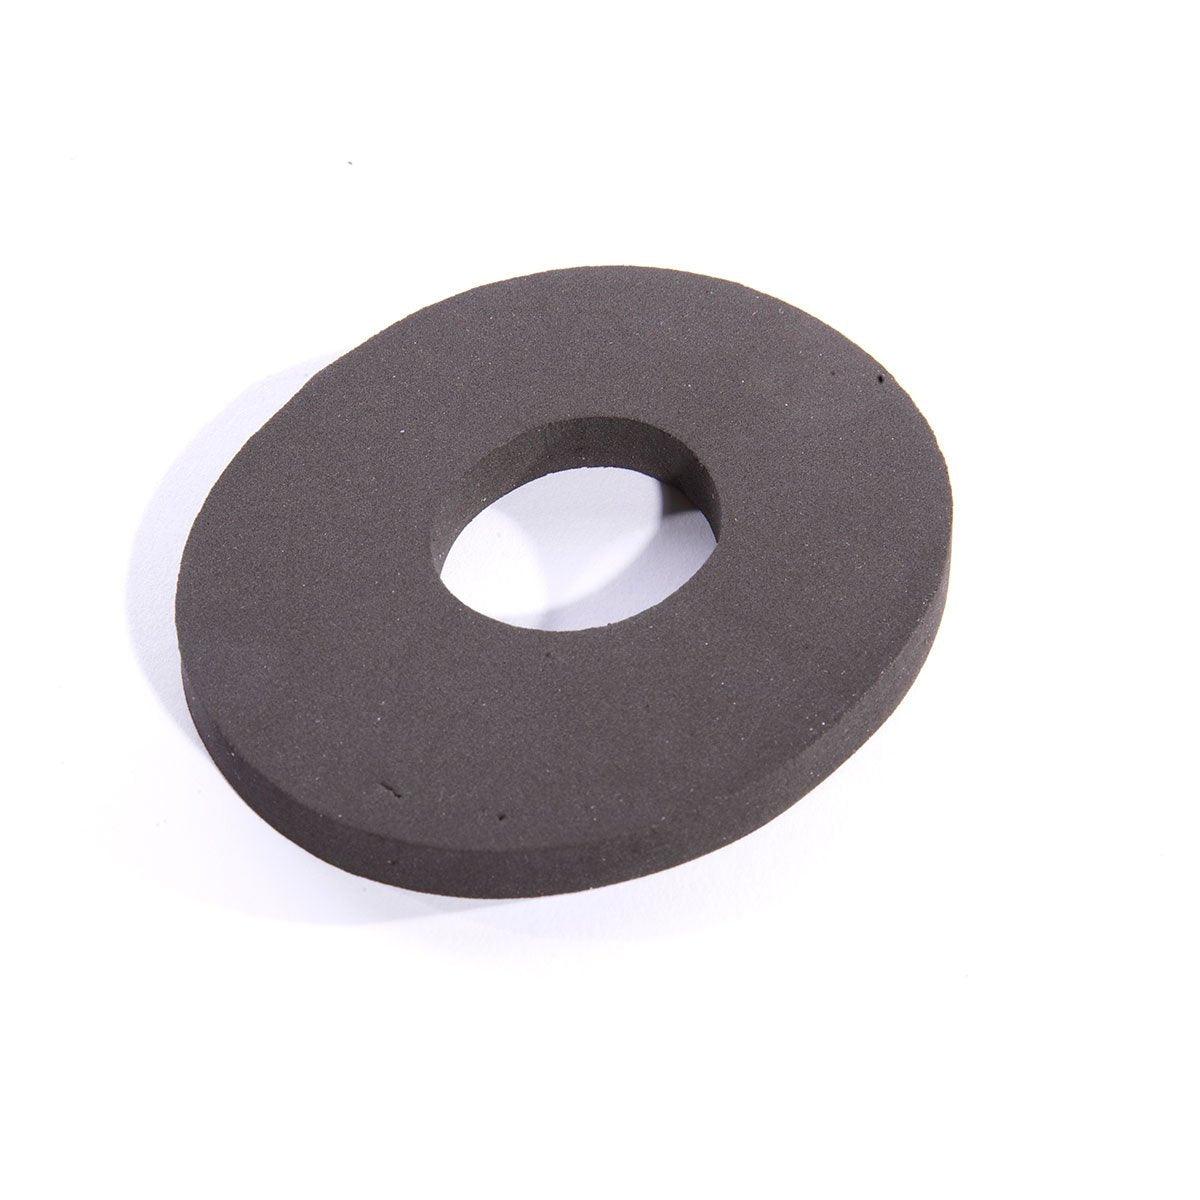 Dim Gray SpareParts O-Stabilizer Ring - Large